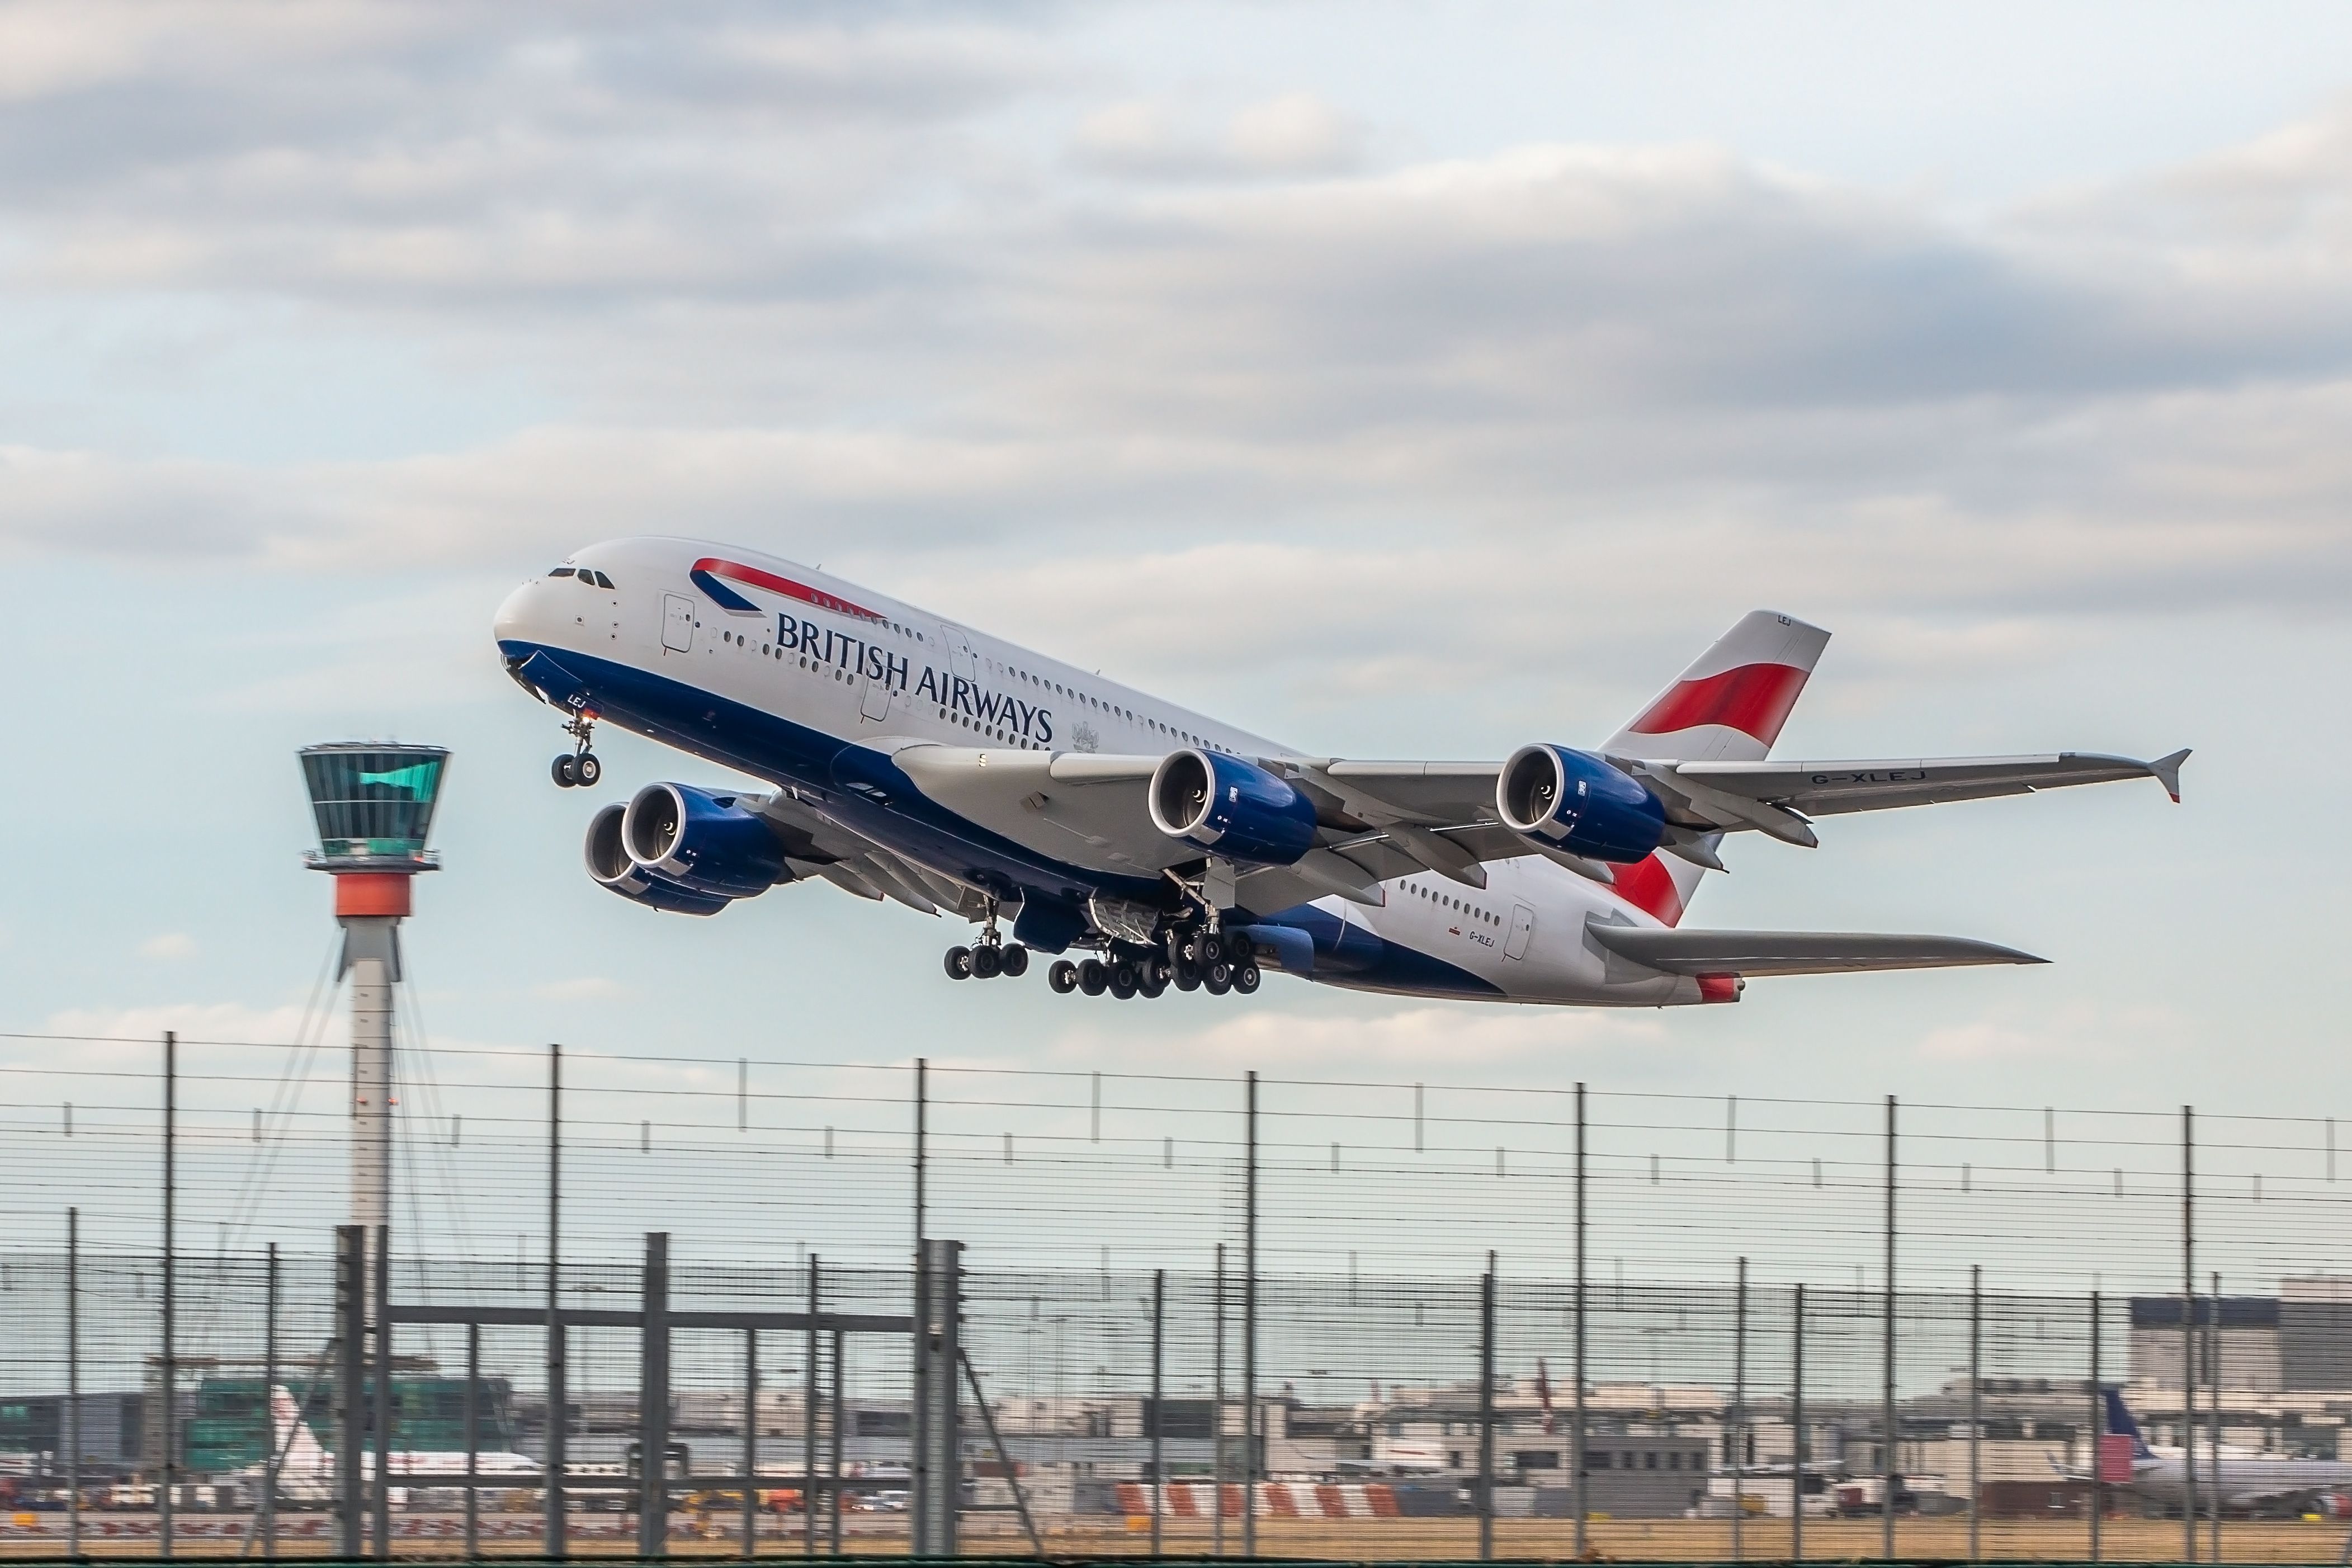 British Airways Airbus A380 Departing From London Heathrow Airport